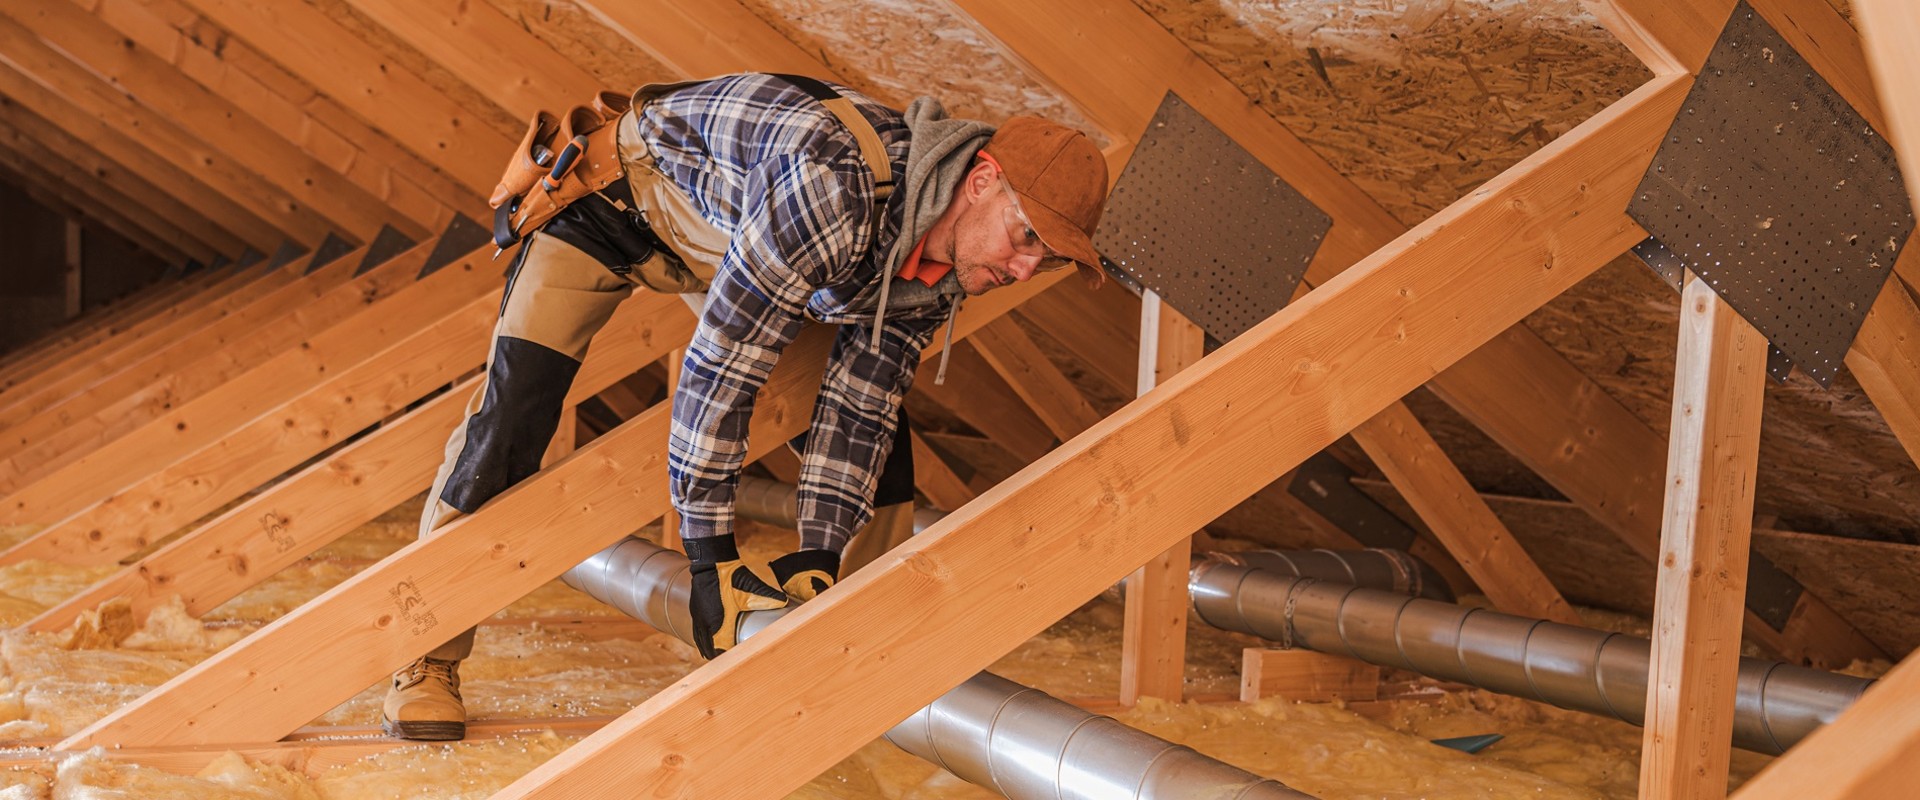 Insulating Your Ducts: What You Need to Know